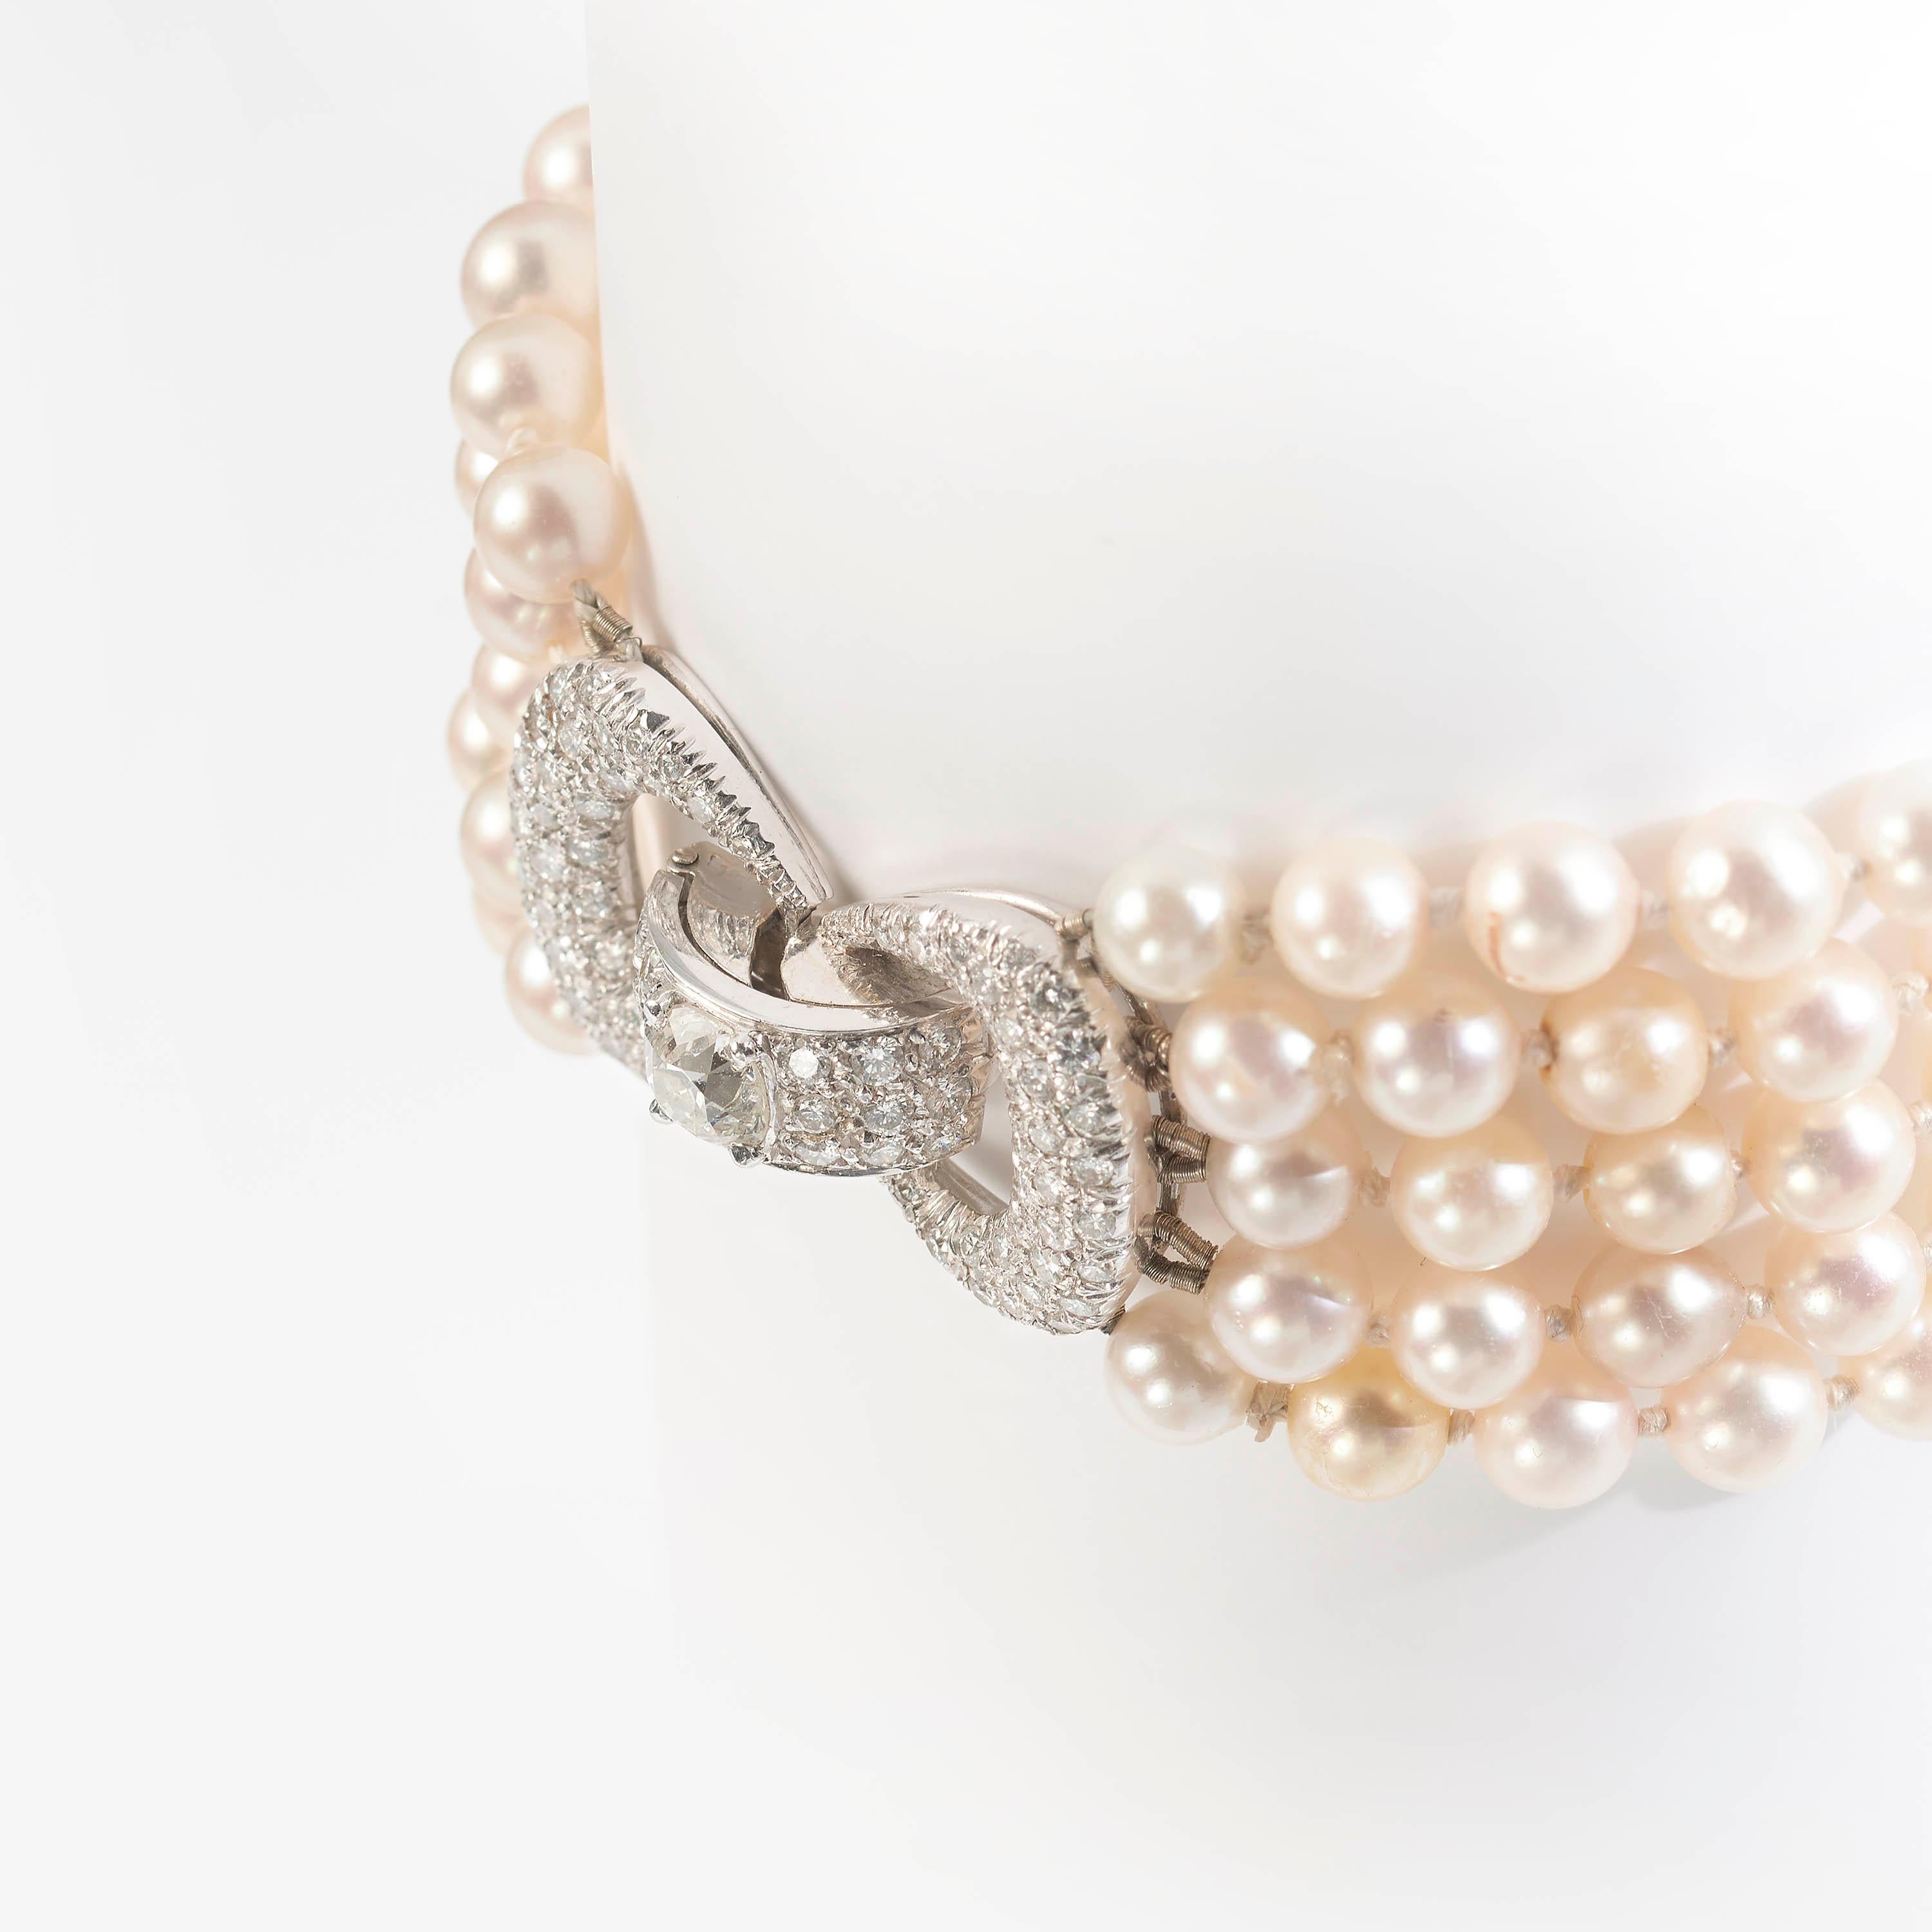 A multi-row pearl and diamond bracelet, consisting of five strung rows of white cultured pearls, measuring approximately 5mm each, terminating in a diamond-set bow design clasp, mounted in white gold, set with a central old-cut cushion shaped